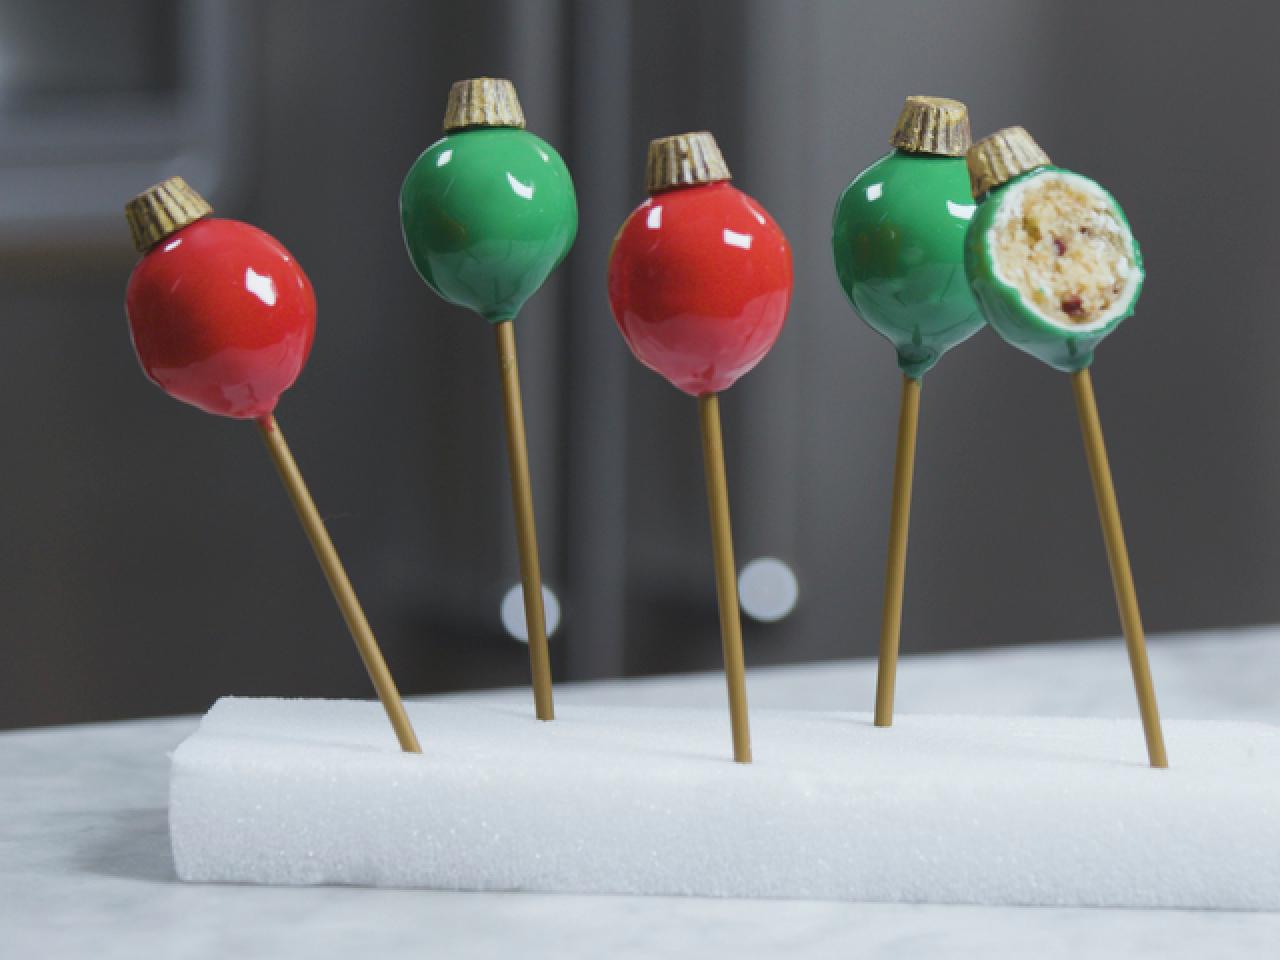 The Sweet Source's Party Supplies | Christmas cake pops, Christmas cake,  Holiday cake pop